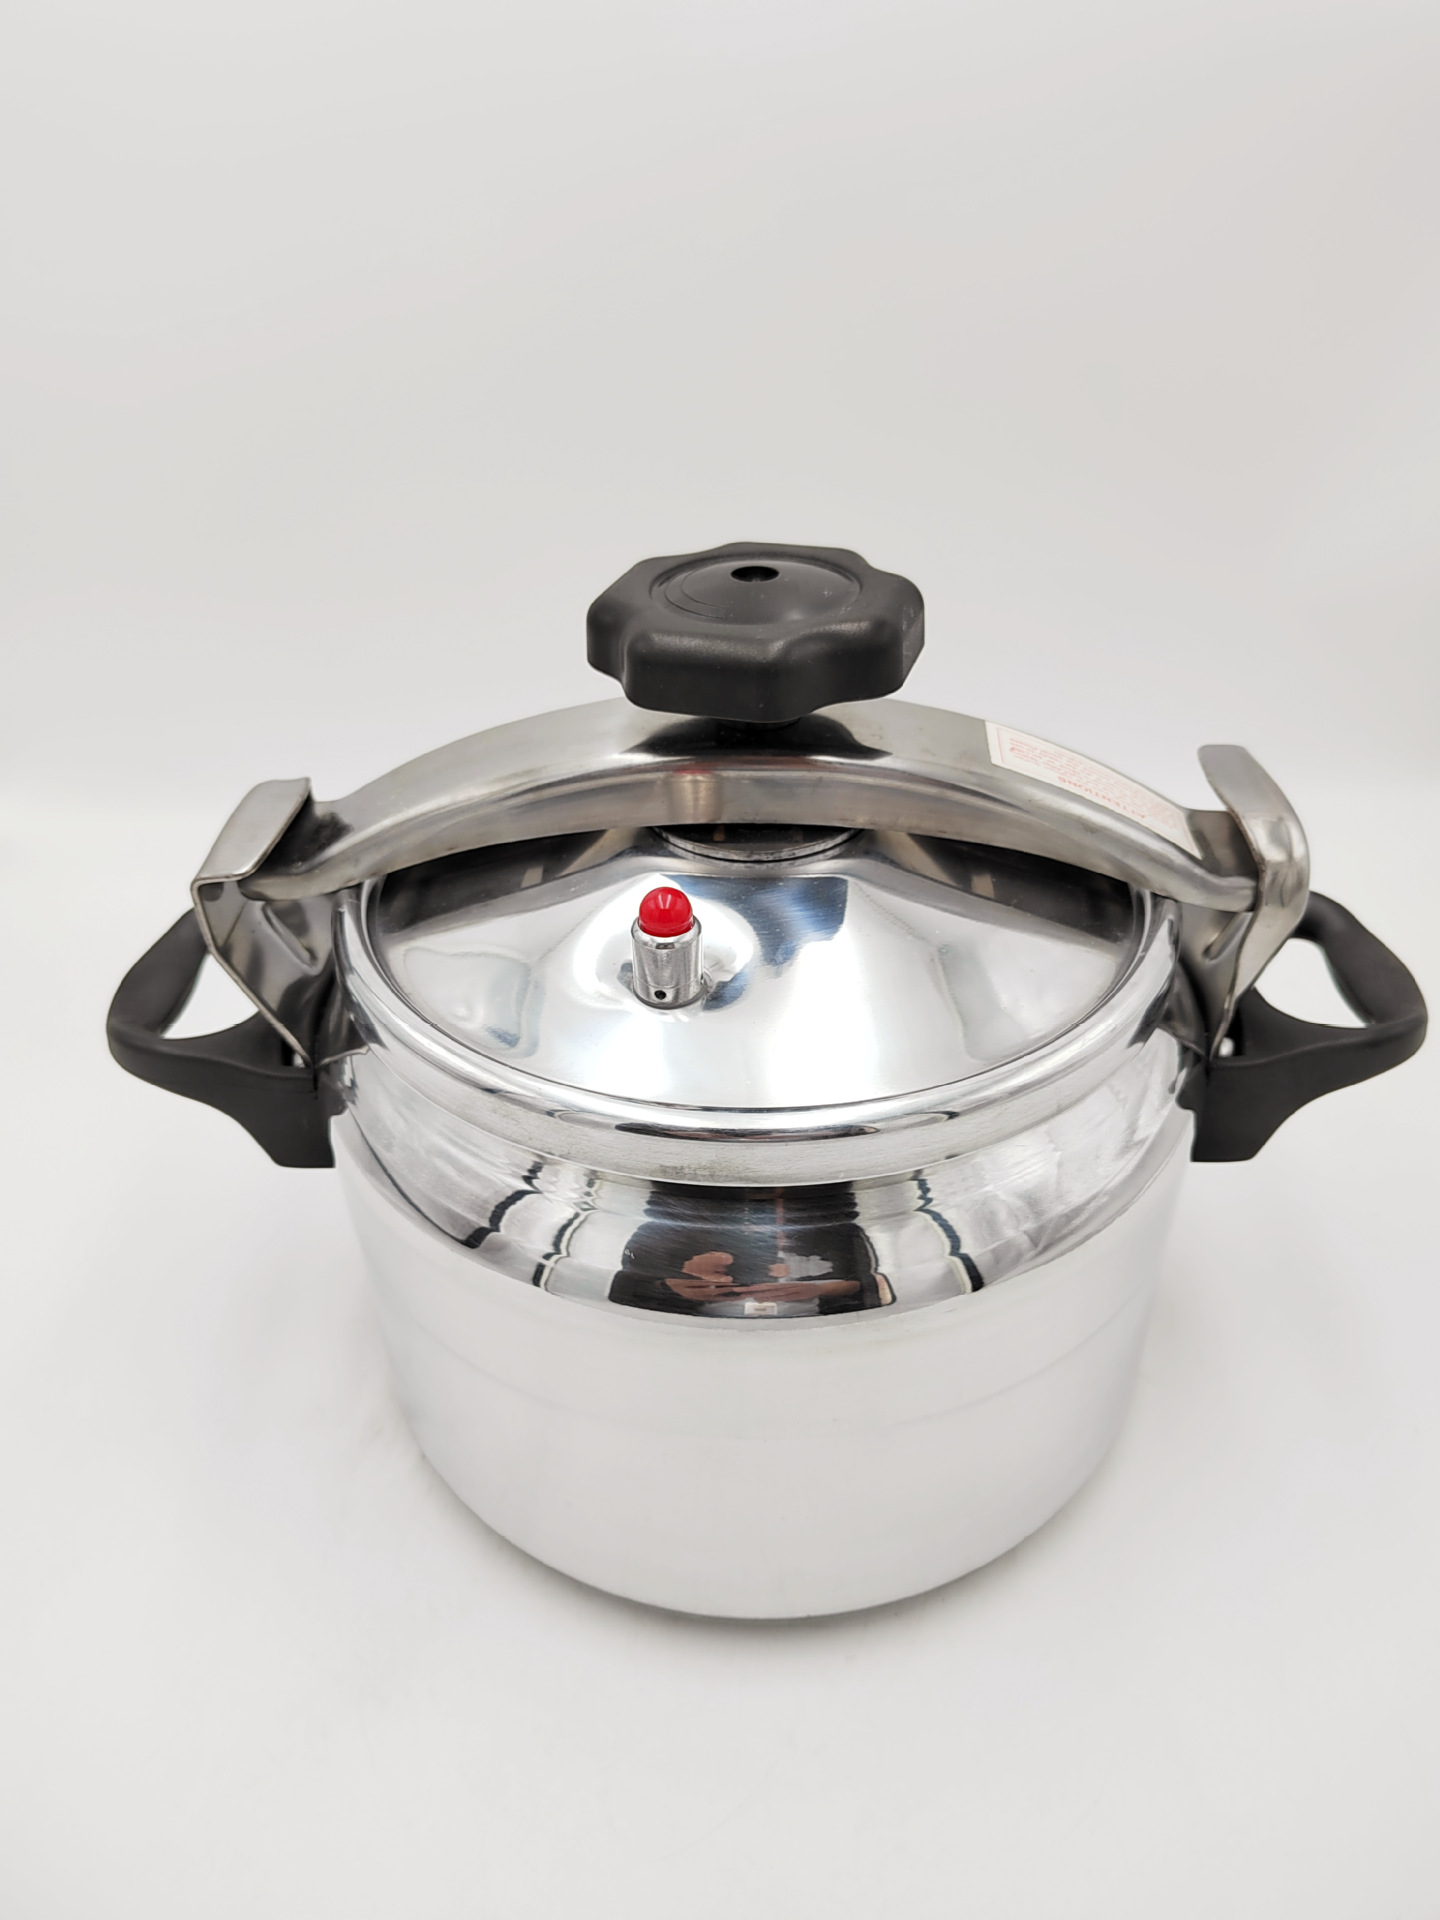 Kitchen Cookware Stainless Steel Stovetop High Pressure Cooker Pot For Cooking